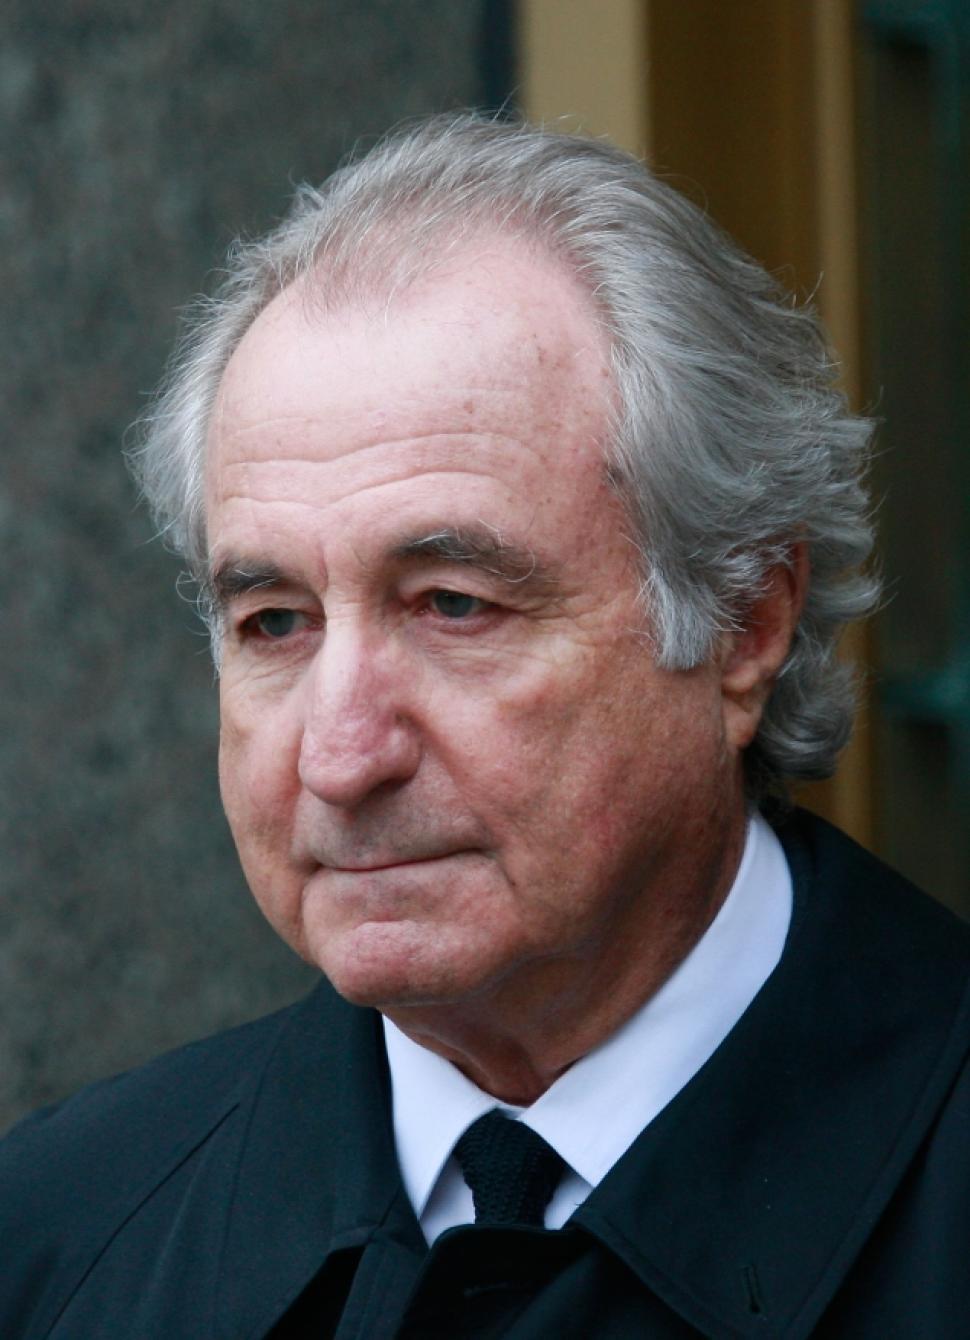 Bernie Madoff Most famous Ponzi scheme Madoff exhibited unrealistically steady returns of ~10% for decades It all came crashing down